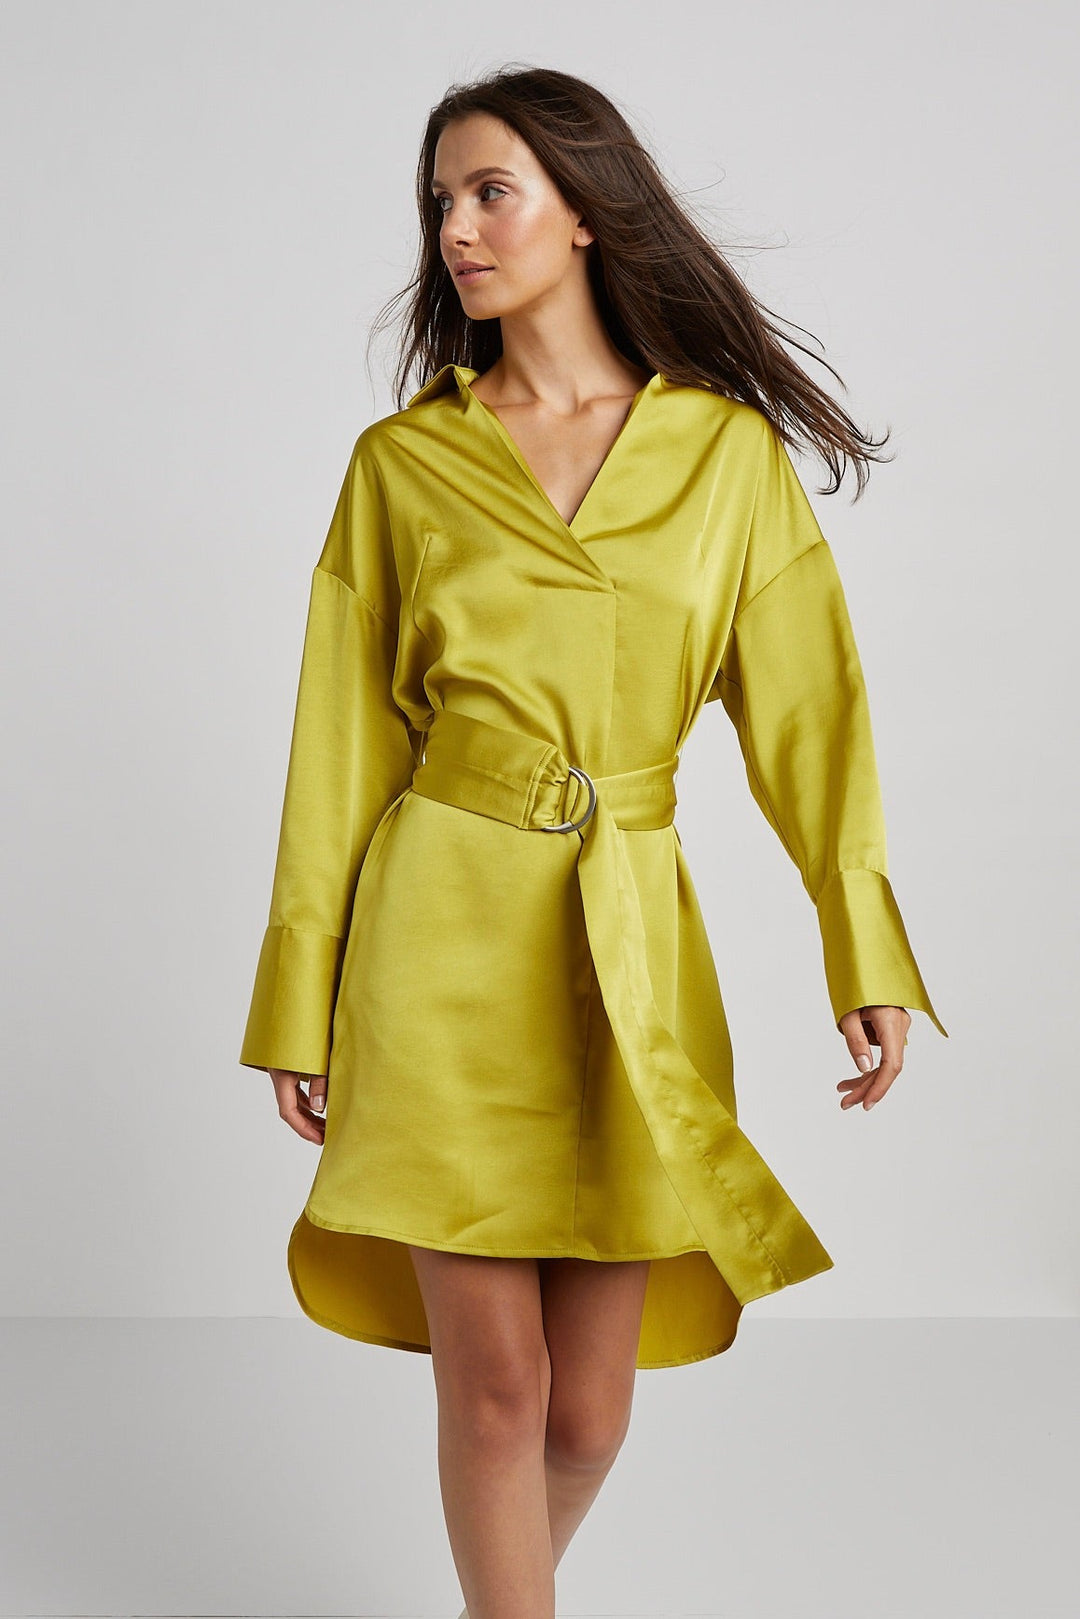 Adroit Atelier Kyoko Pullover Dress in Chartreuse